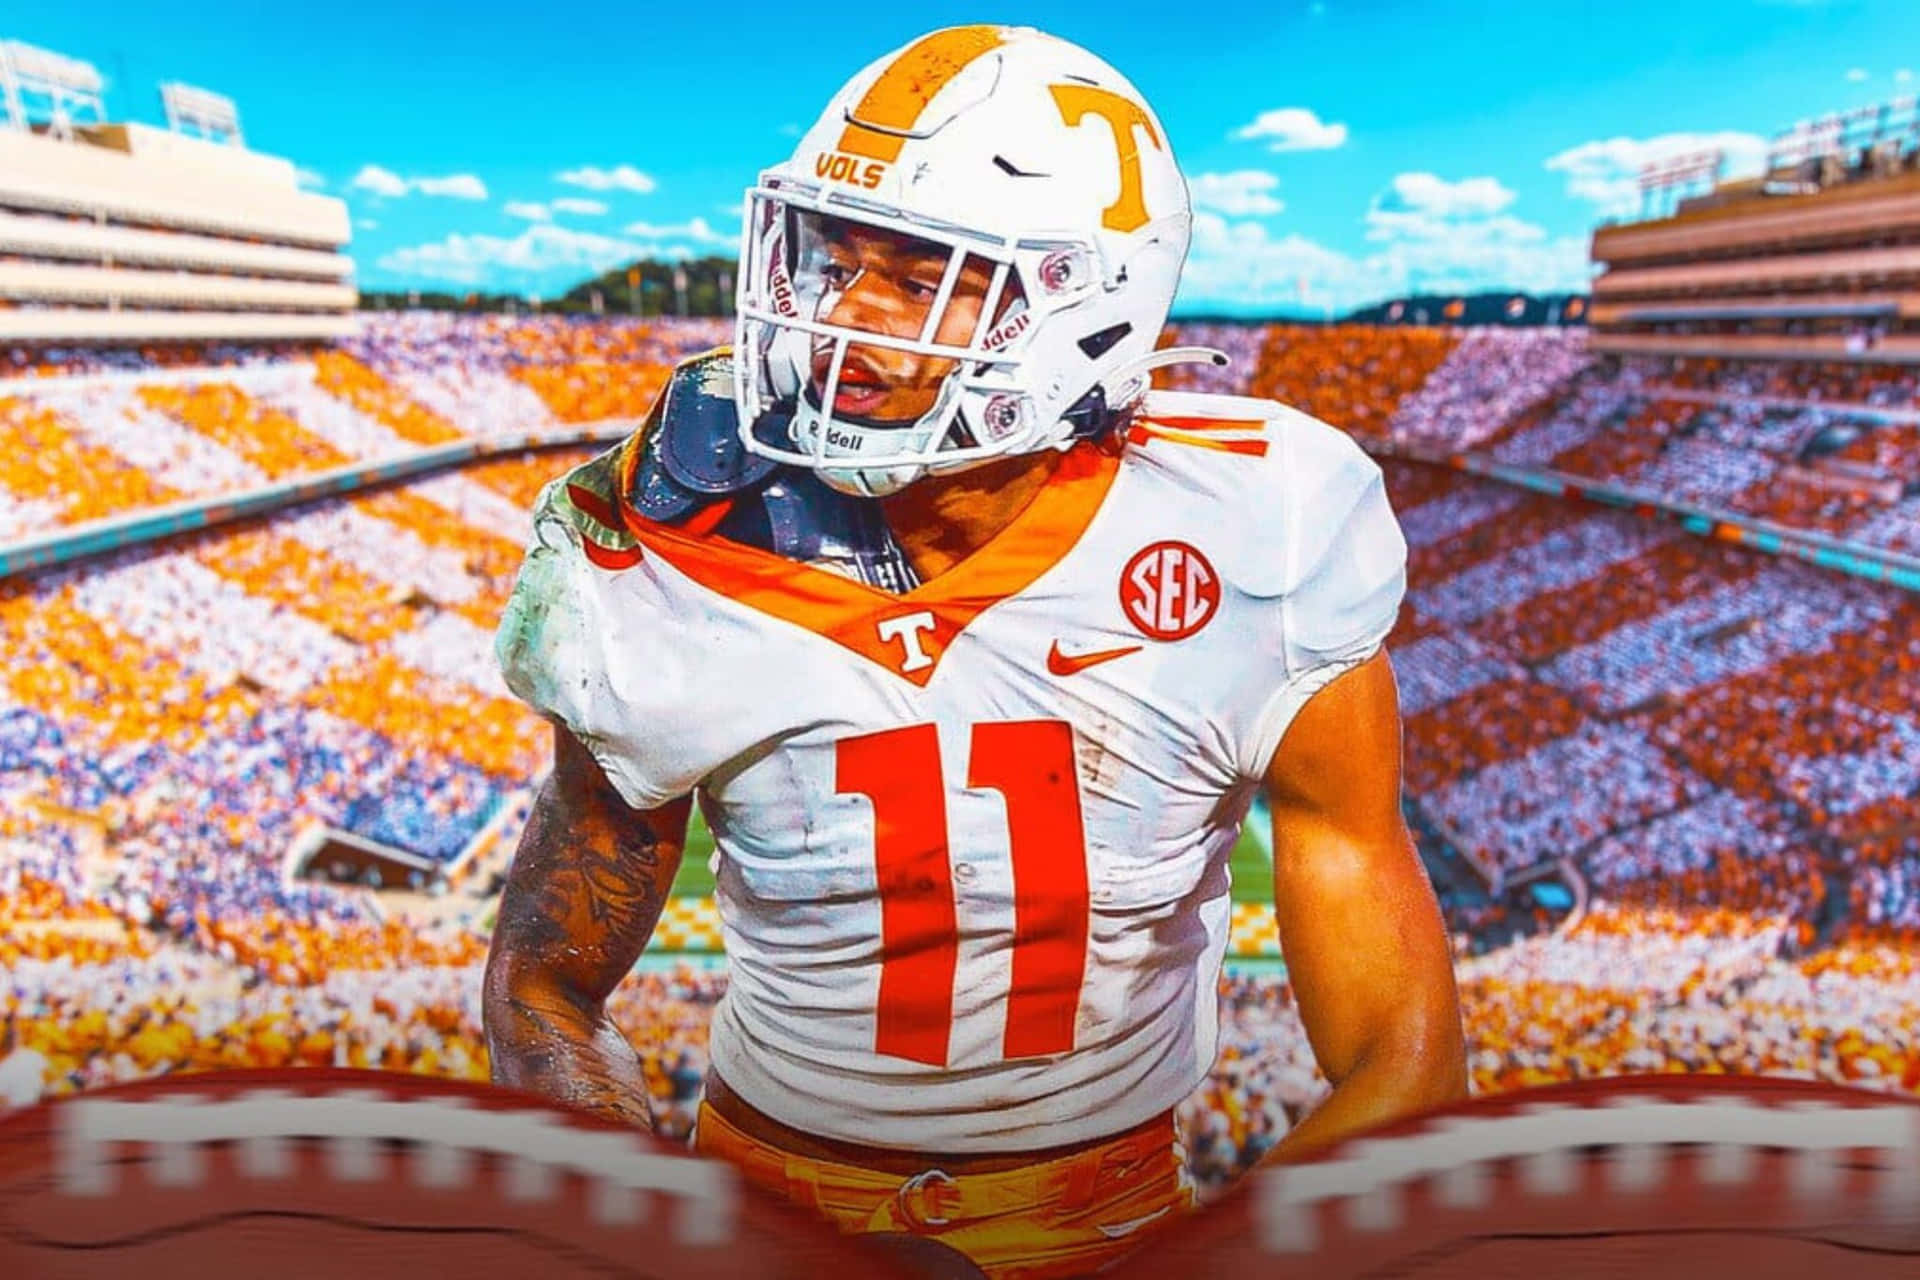 Tennessee Vols Football Player Number11 Wallpaper